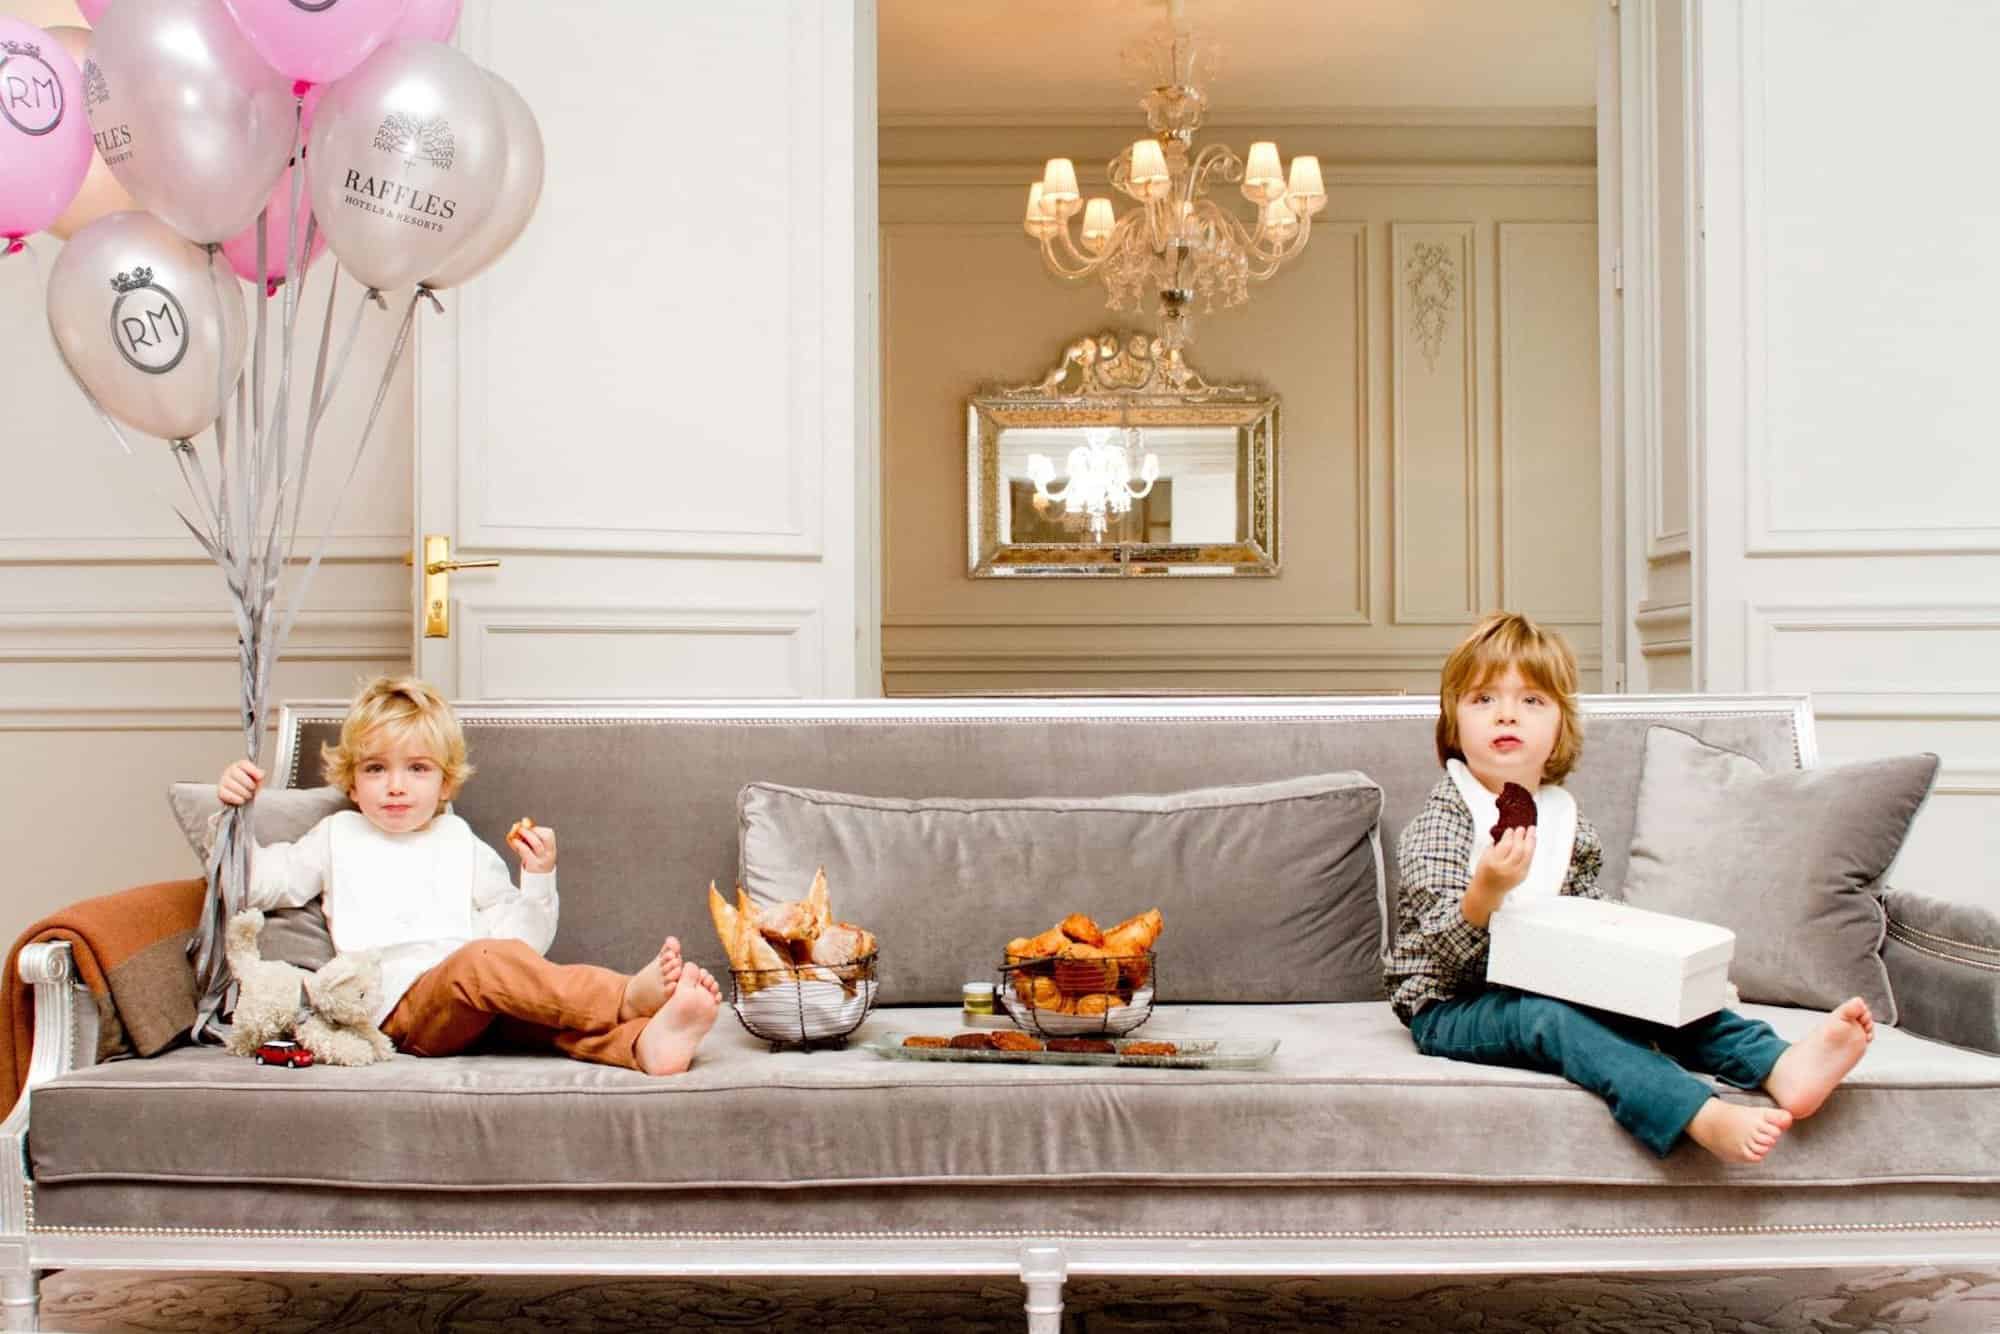 2 young boys sit on a sofa in a hotel room, with balloons. they are enjoying cookies and croissants. 